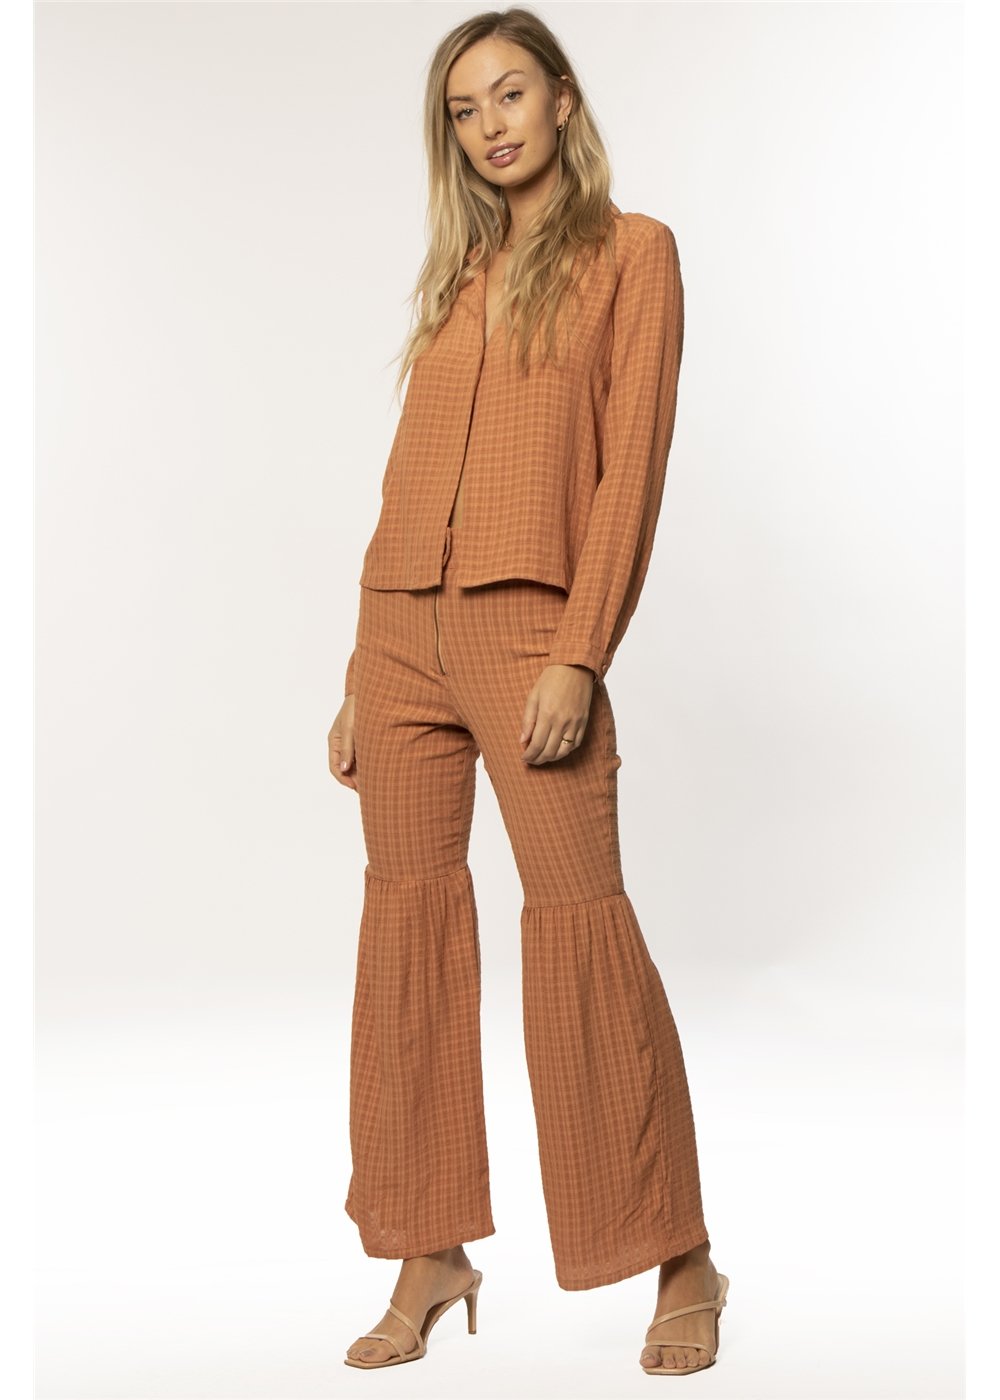 Amuse Society Women's Gingersnap Cantina Woven Pant. Front View with Matching Top on Model.